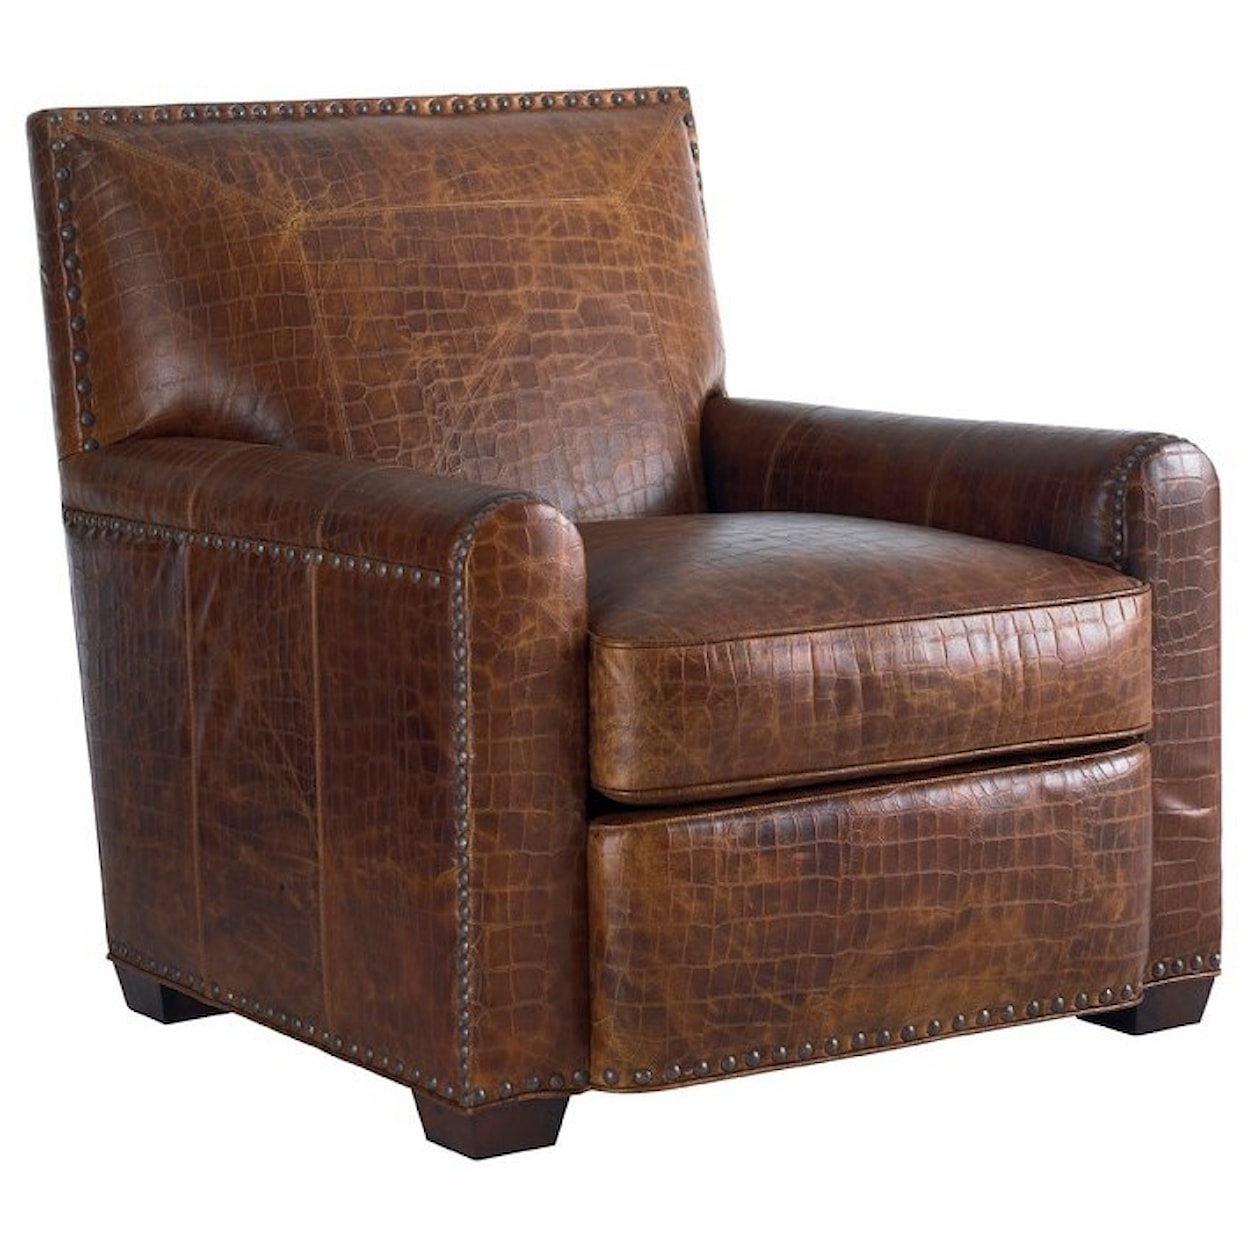 Tommy Bahama Home Tommy Bahama Upholstery Stirling Park Leather Chair